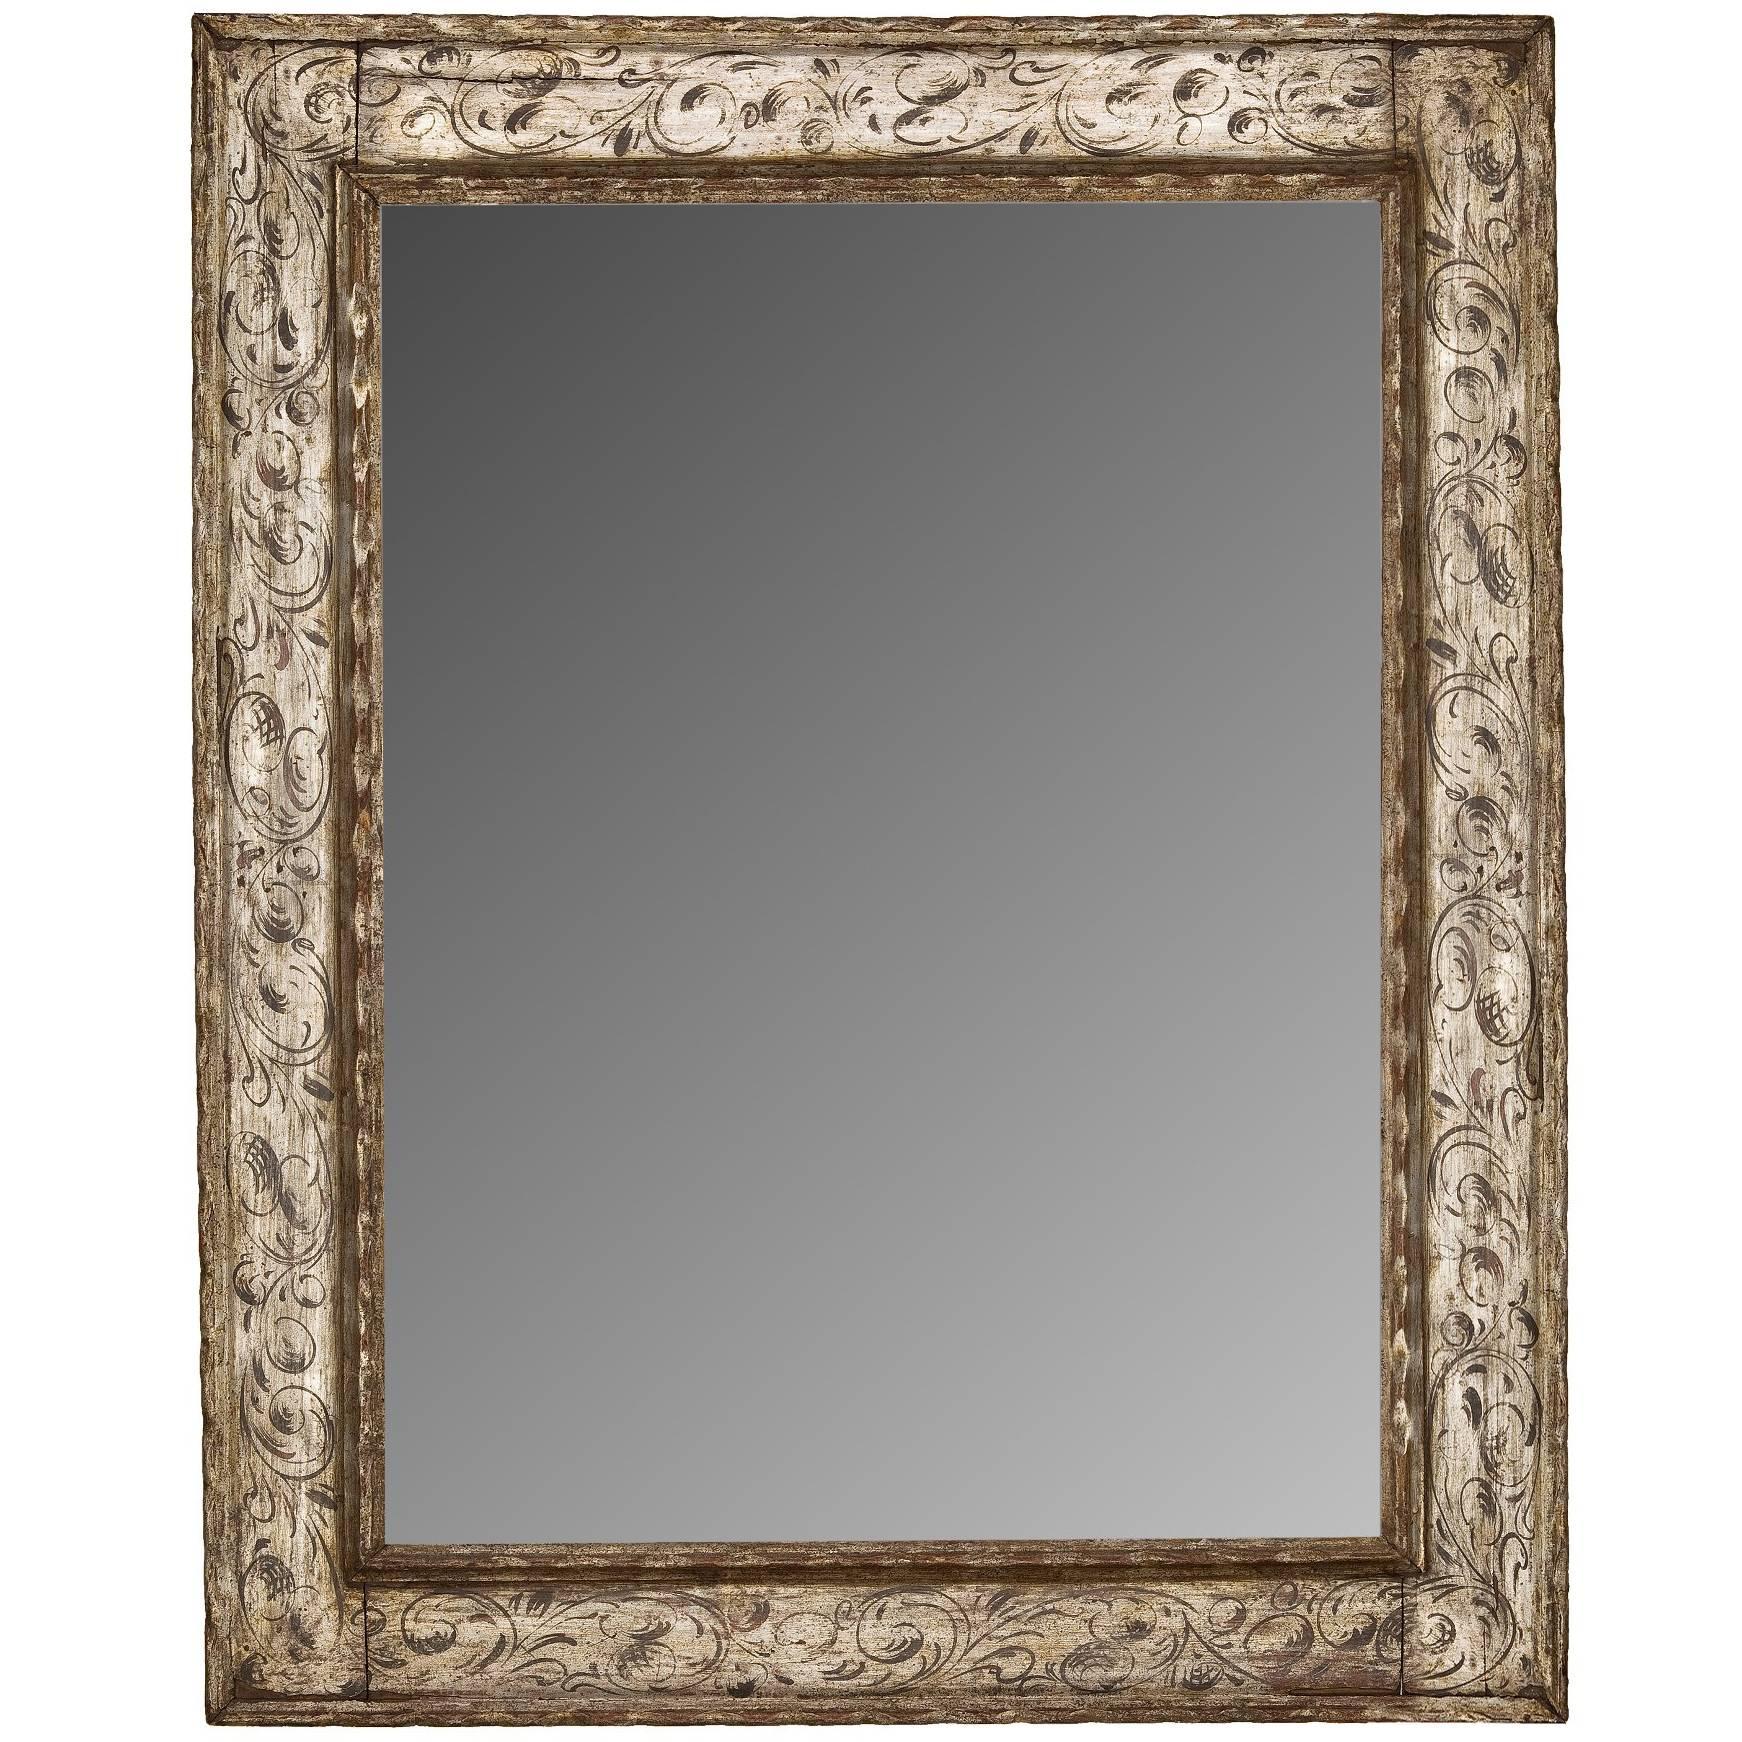 Spanish Style Silver Patterned Giltwood Mirror For Sale